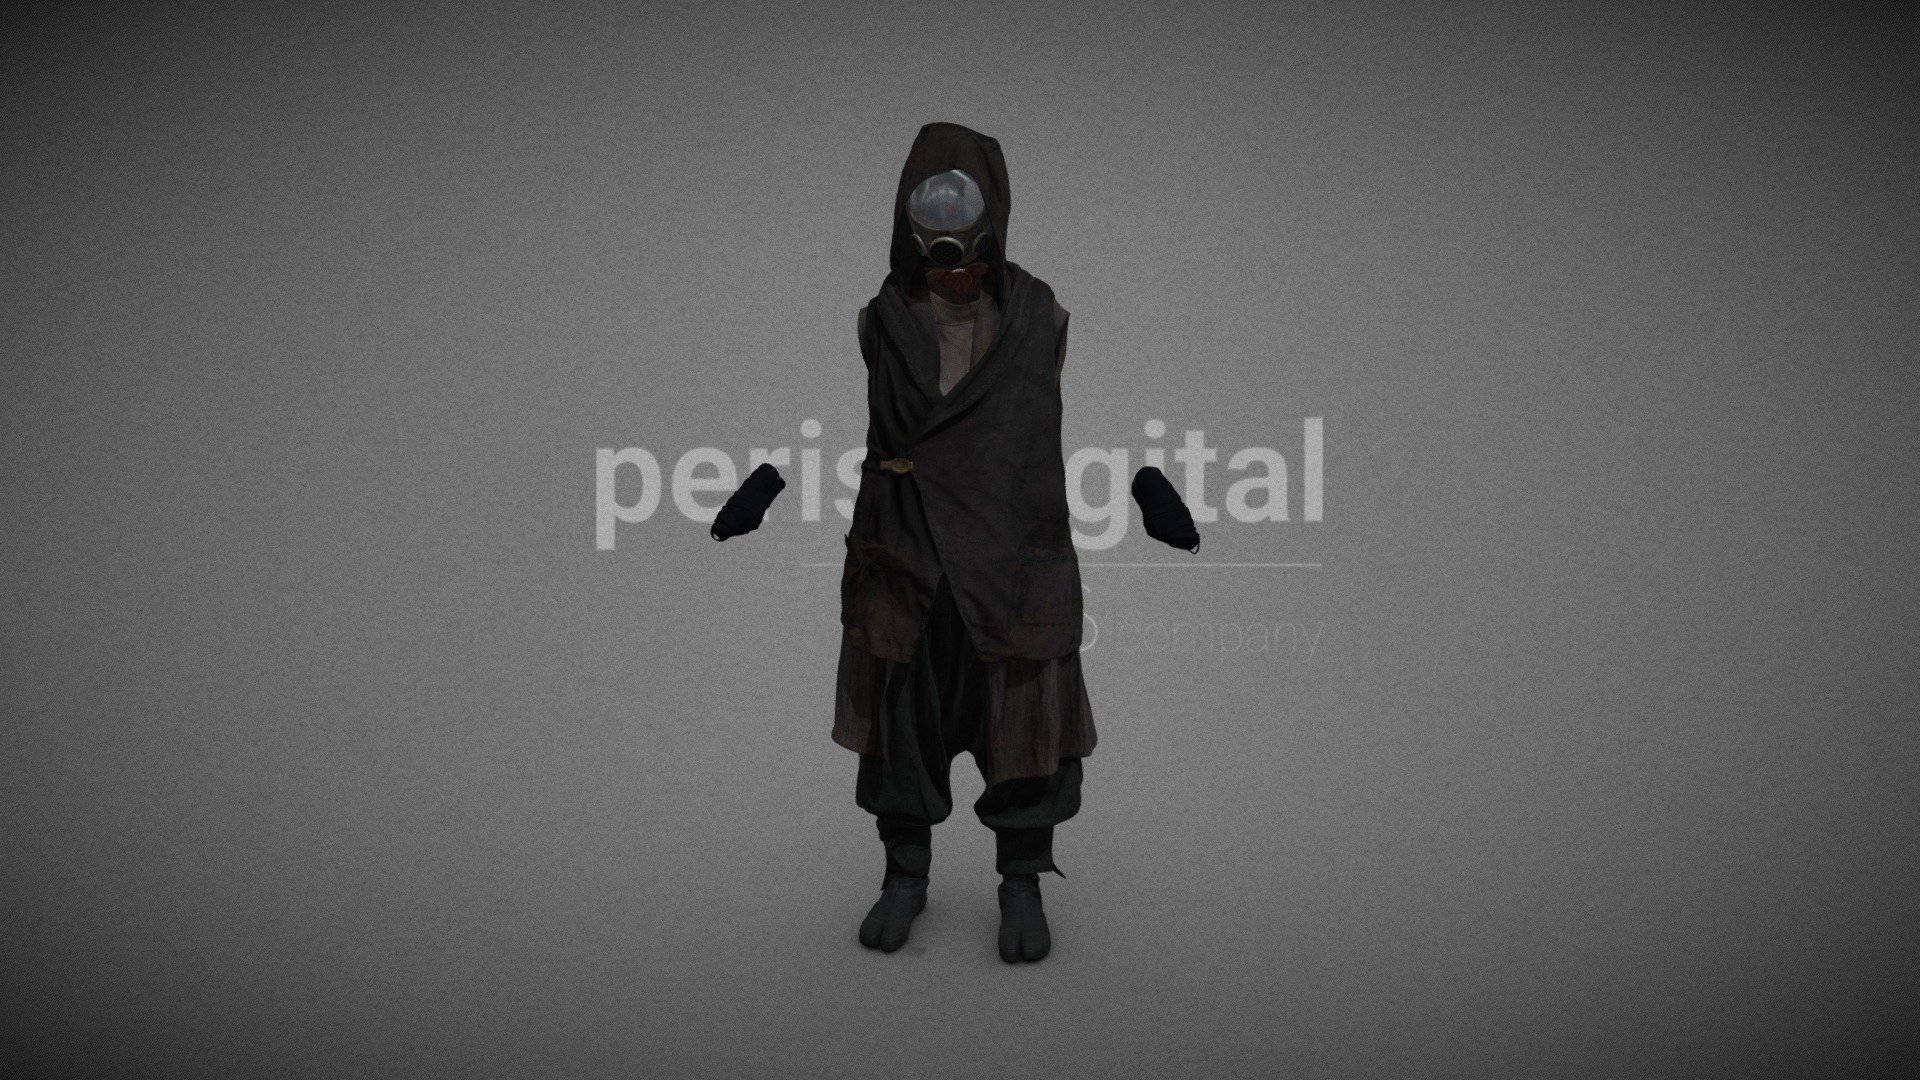 Gas mask, long vest with gray hood, dark gray military vest with buckle, flap pockets and stitching, zig zag back stitching, leather belt and suspenders with buckle, gray tank top, black fingerless ninja gloves, dark gray military trousers, dark gray ninja tabi boots.


They are optimized for use in 3D scenes of high polygonalization and optimized for rendering.
We do not include characters, but they are positioned for you to include and adjust your own character.

They have a model LOW (_LODRIG) inside the Blender file (included in the AdditionalFiles), which you can use for vertex weighting or cloth simulation and thus, make the transfer of vertices or property masks from the LOW to the HIGH** model.

We have included the texture maps in high resolution, as well as the Displacement maps, so you can make extreme point of view with your 3D cameras, as well as the Blender file so you can edit any aspect of the set. 

Enjoy it.

Web: https://peris.digital/ - Wasteland Series - Model 09 - Buy Royalty Free 3D model by Peris Digital (@perisdigital) 3d model